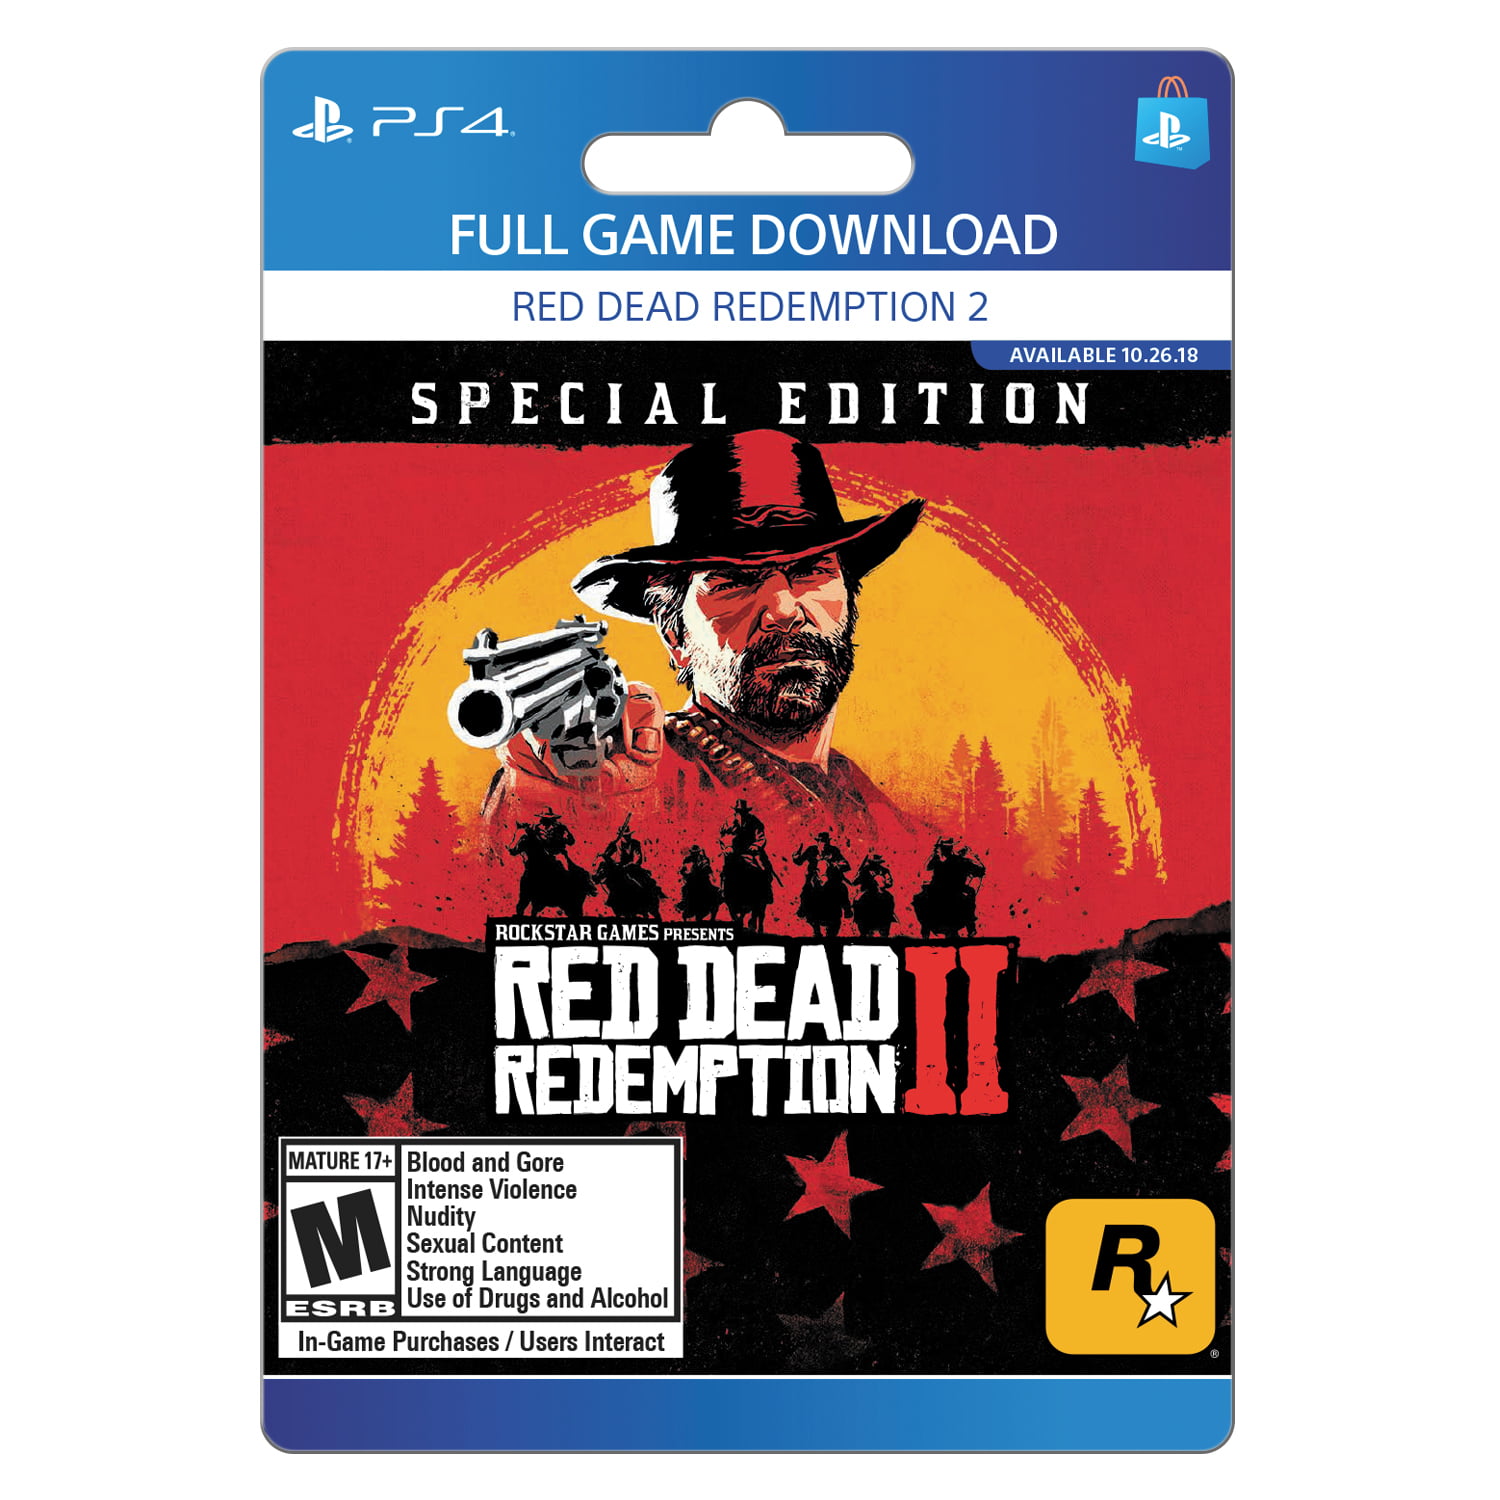 Red dead redemption на ps5. Red Dead ps2. РДР 2 на плейстейшен 4. Red Dead Redemption 2 Special Edition. Red Dead Redemption 2: Ultimate Edition.